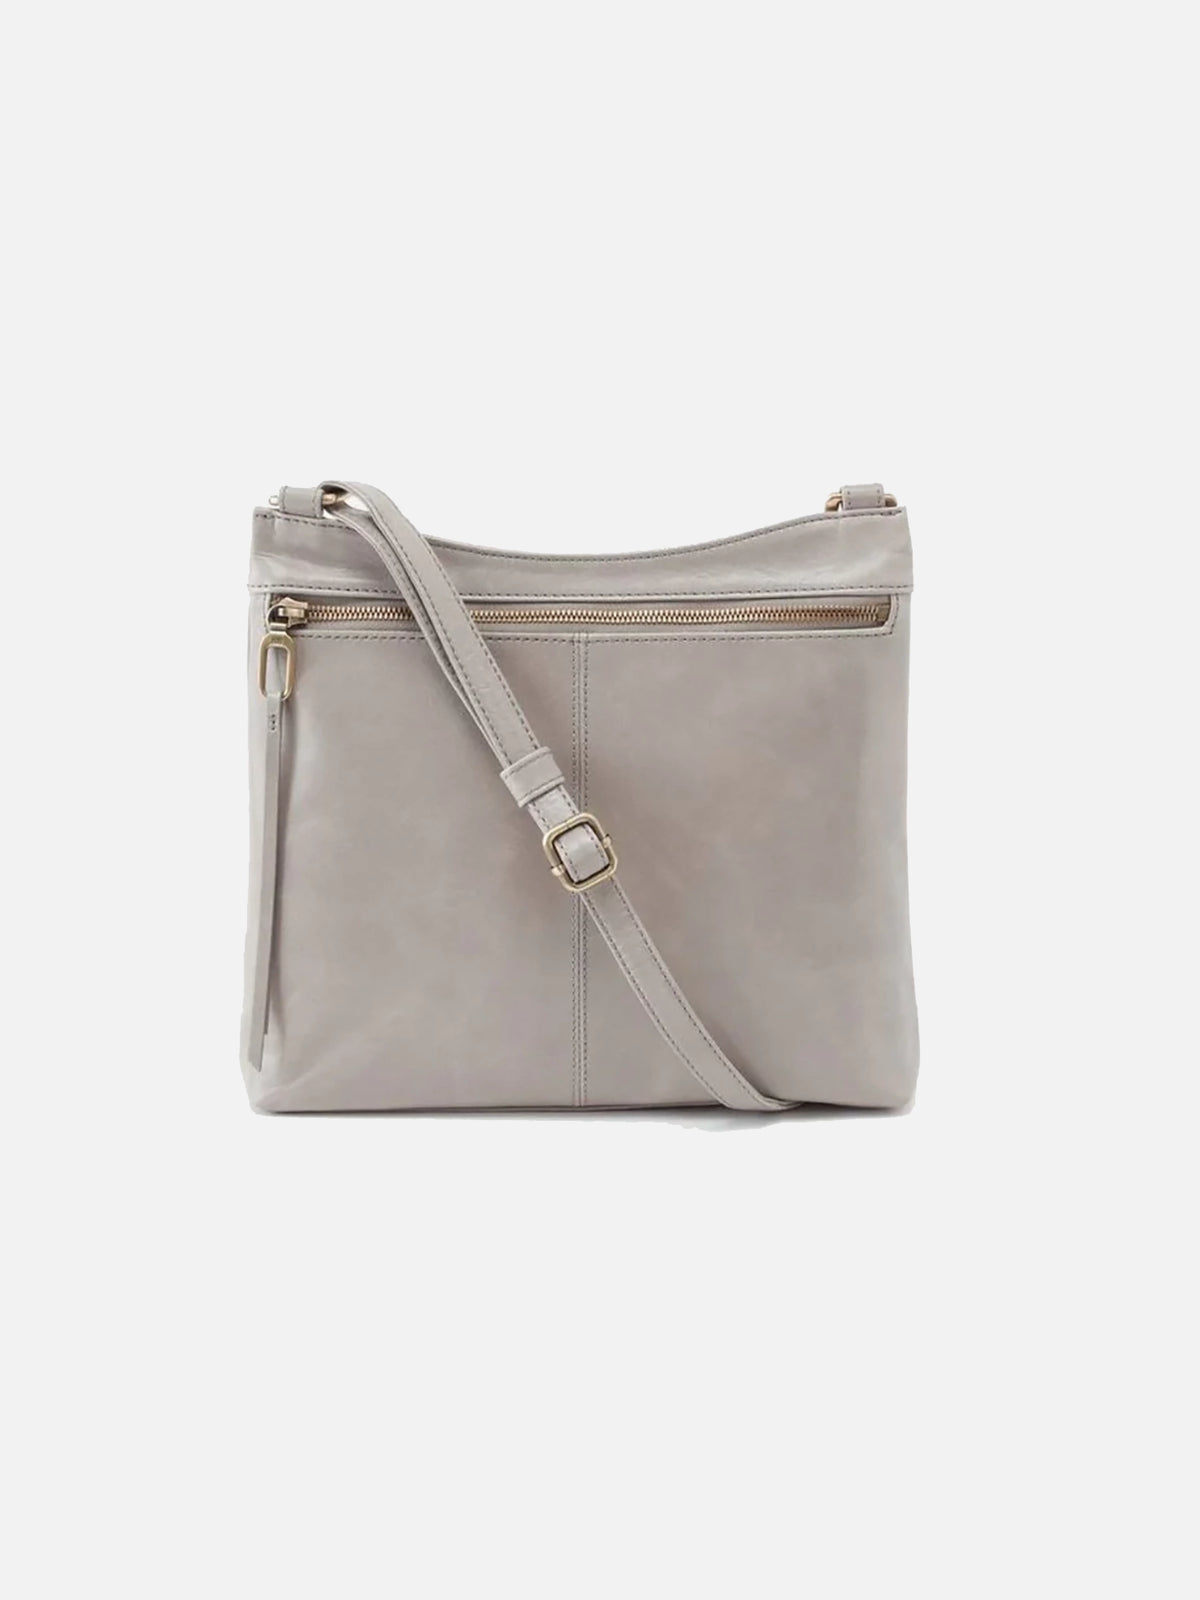 hobo cambel crossbody bag in driftwood polished leather